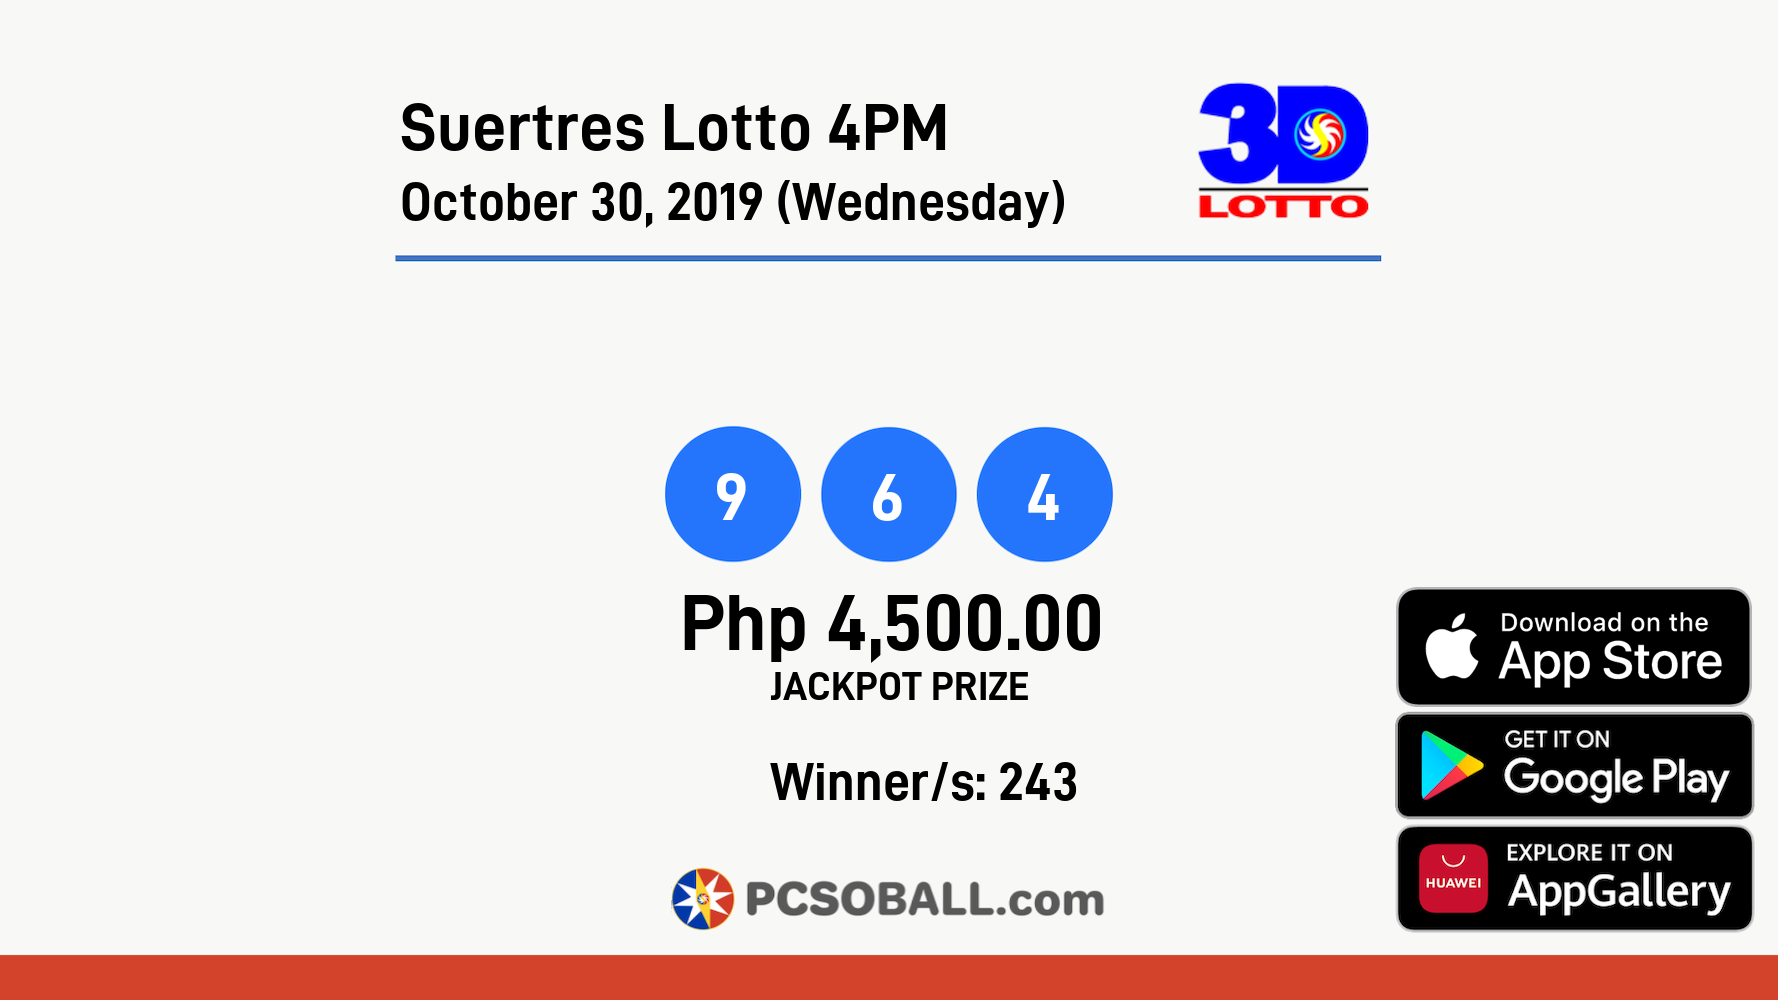 Suertres Lotto 4PM October 30, 2019 (Wednesday) Result